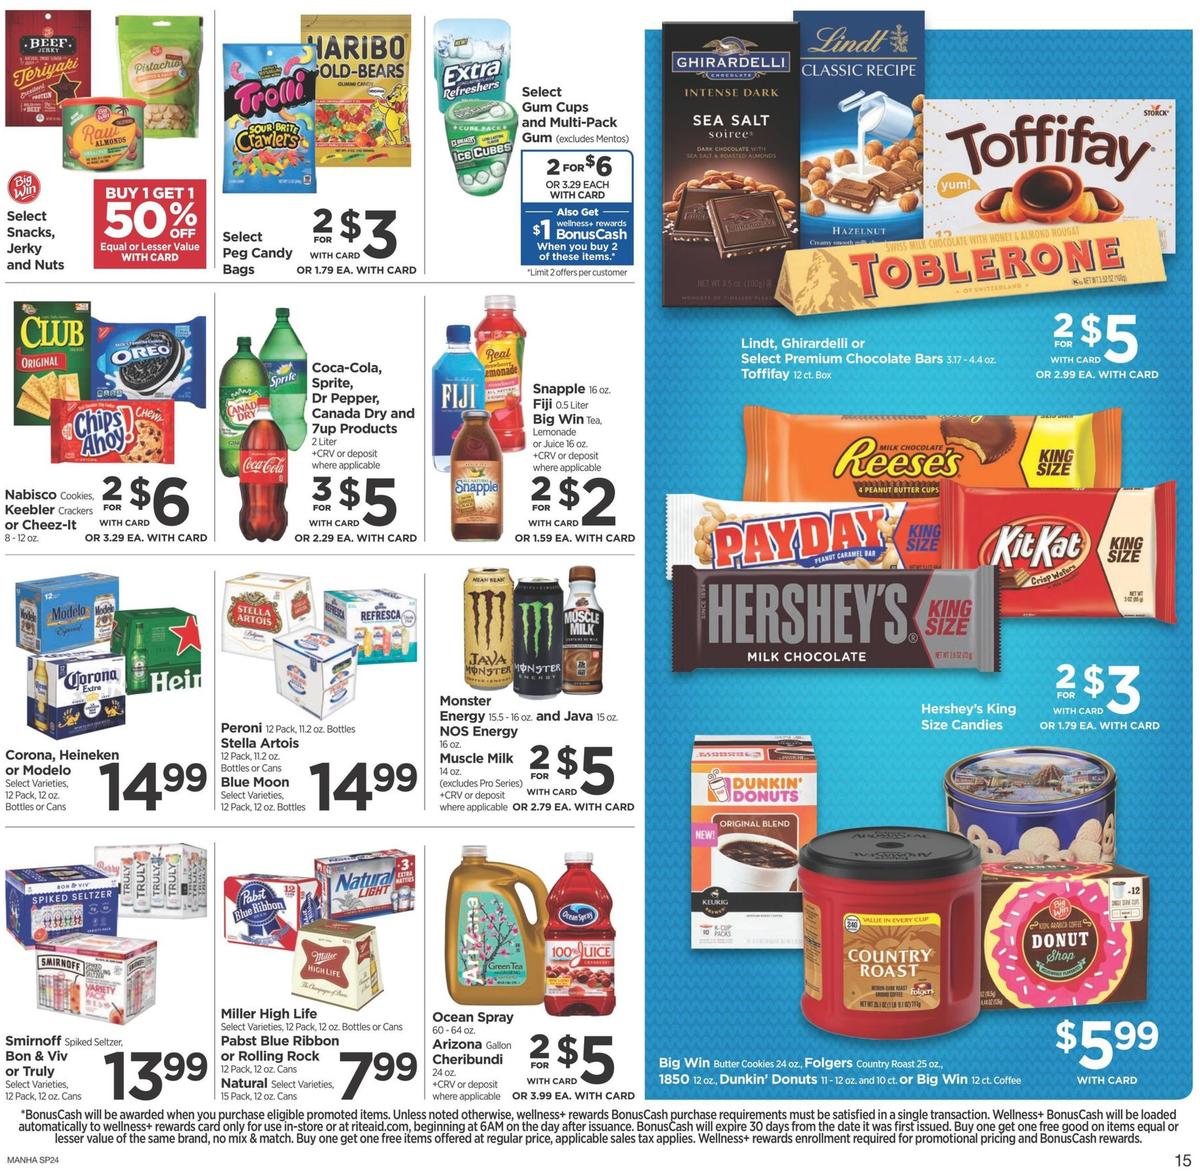 Rite Aid Weekly Ad from December 8